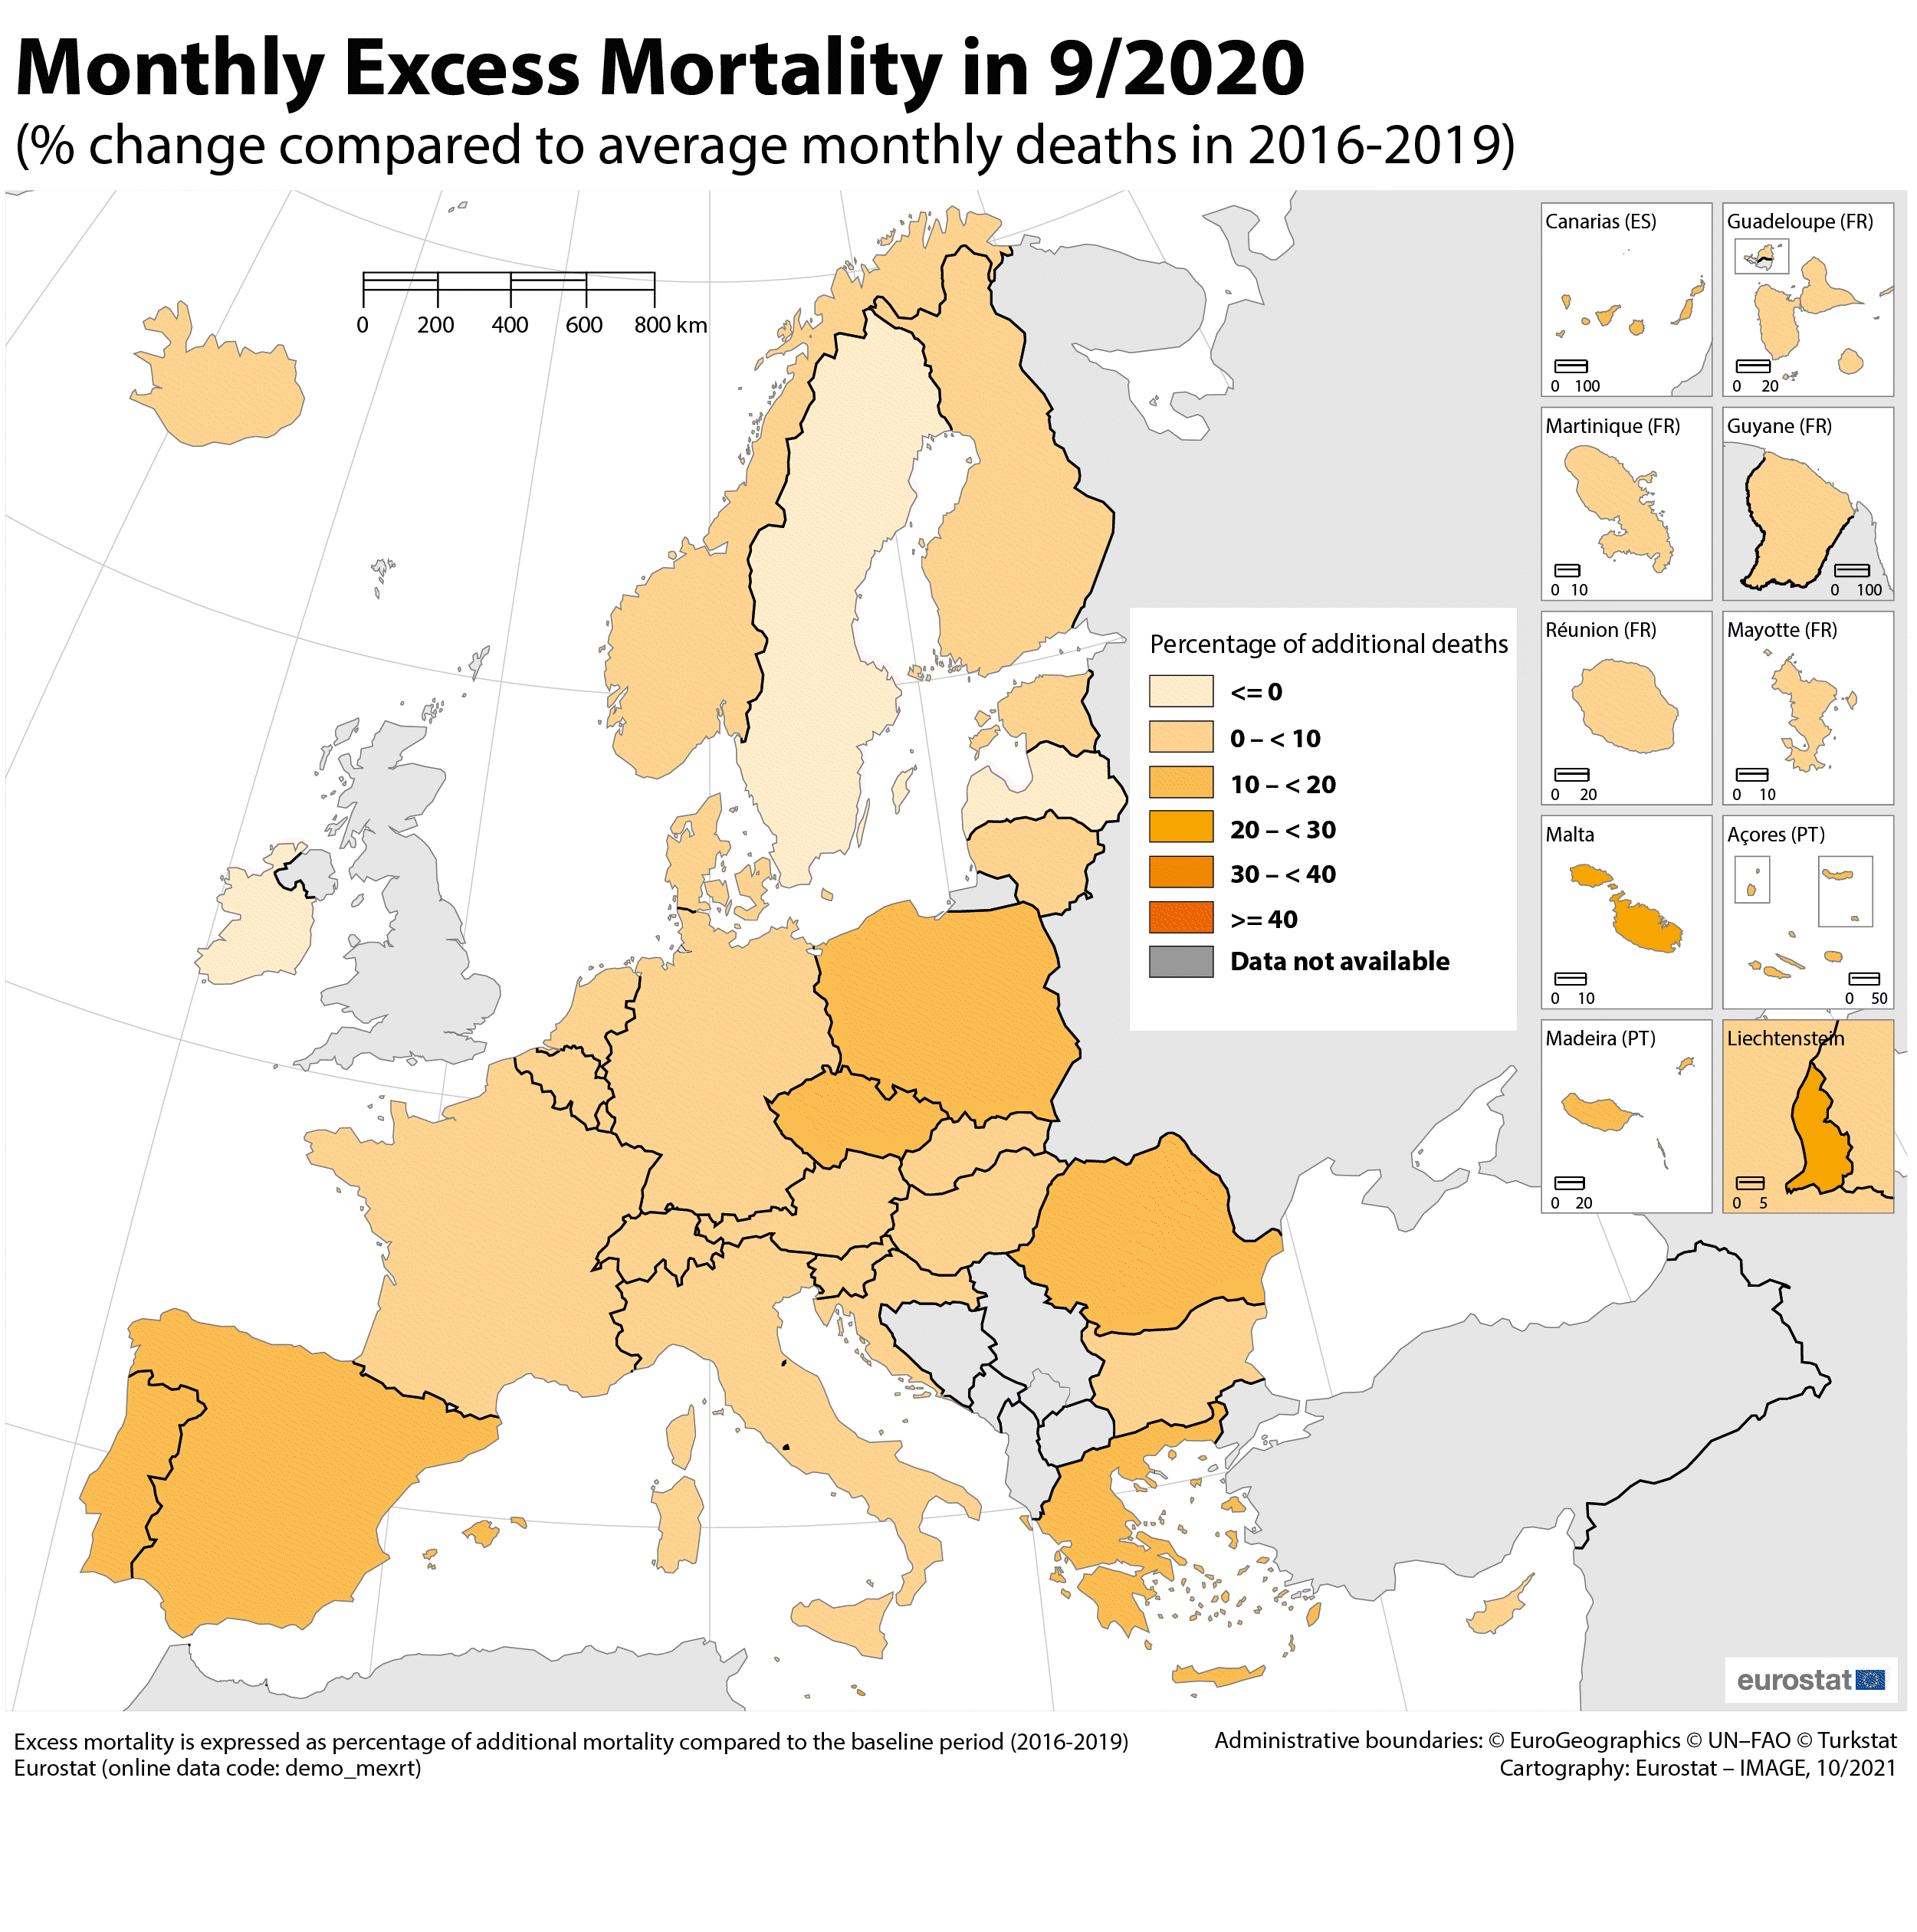 Map in .gif form: Exess mortality from January 2020 up till August 2021, in % change compared with 2016-2019 average